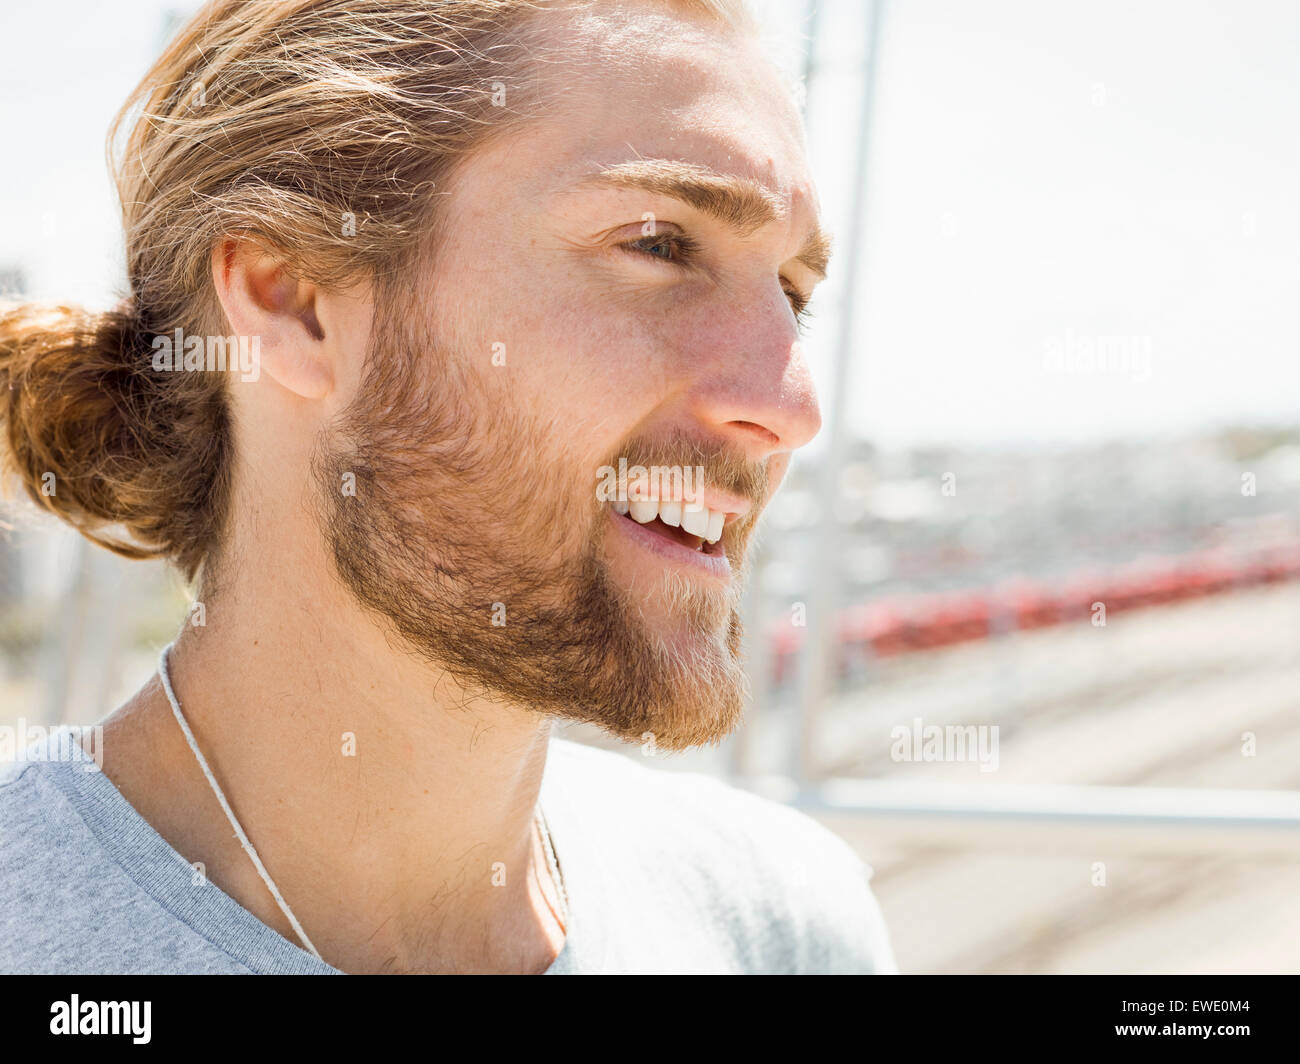 A young man with beard, red hair and ponytail Stock Photo